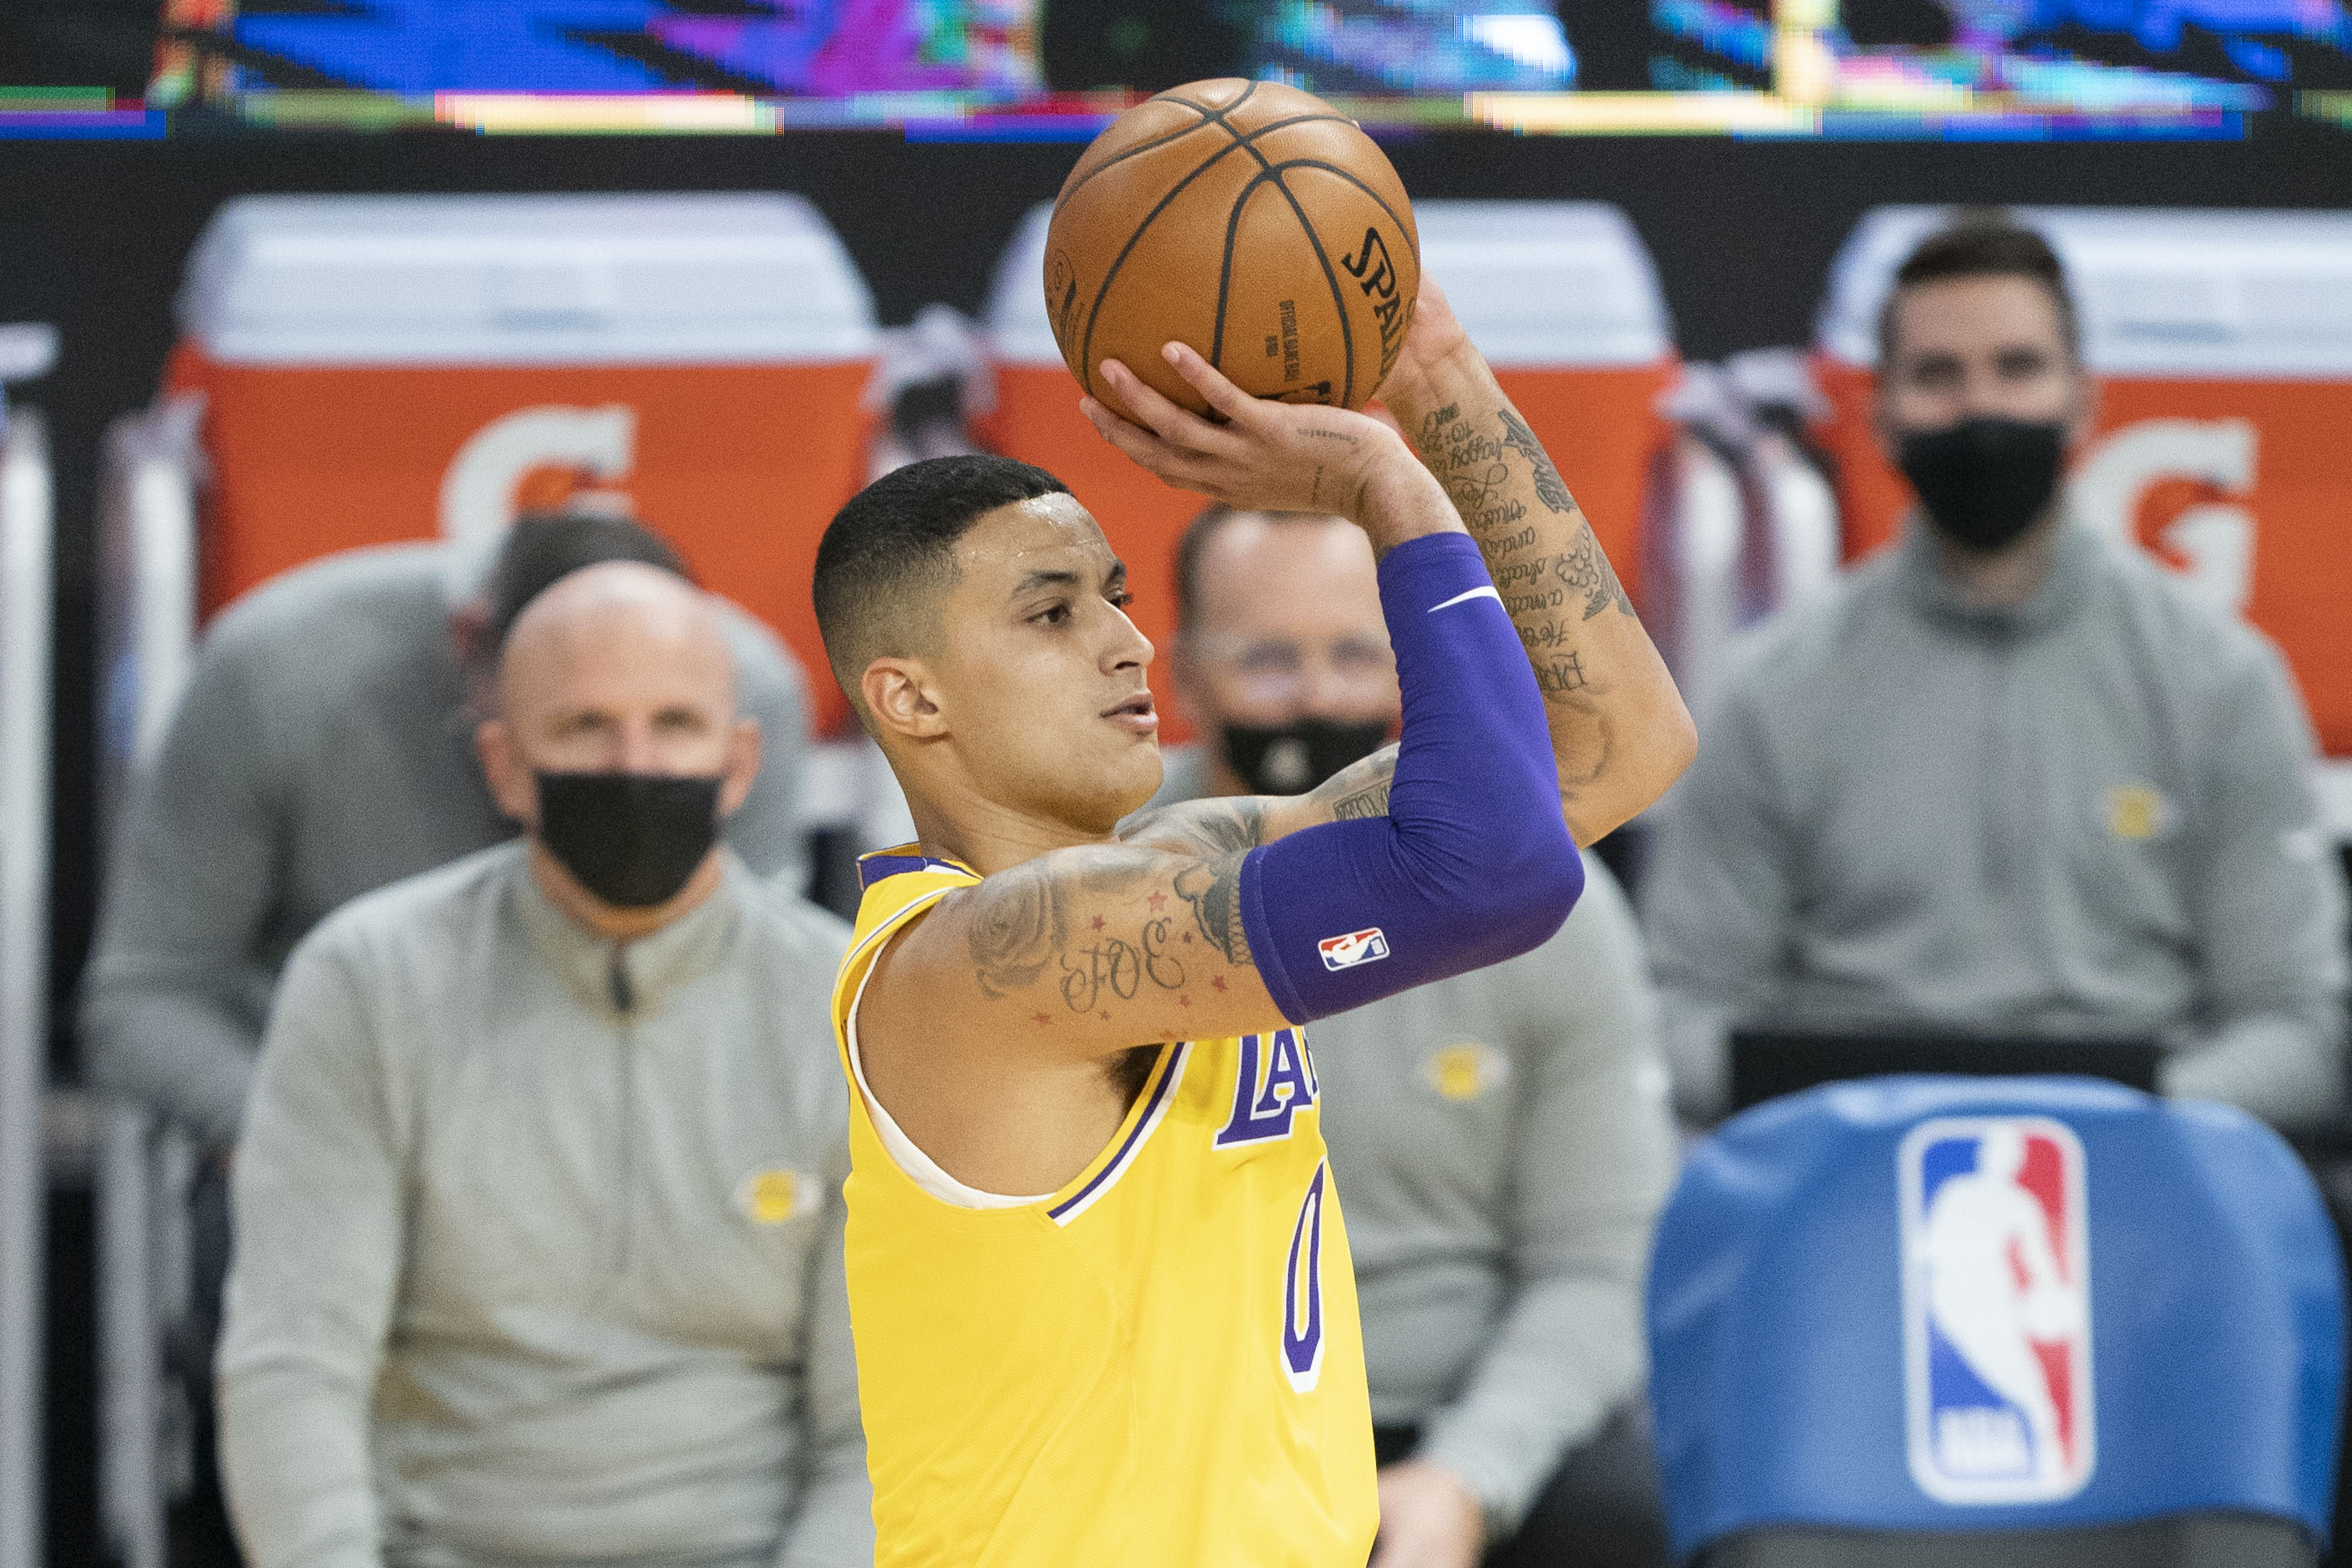 Los Angeles Lakers forward Kyle Kuzma shoots the basketball against the Golden State Warriors during the first quarter at Chase Center.